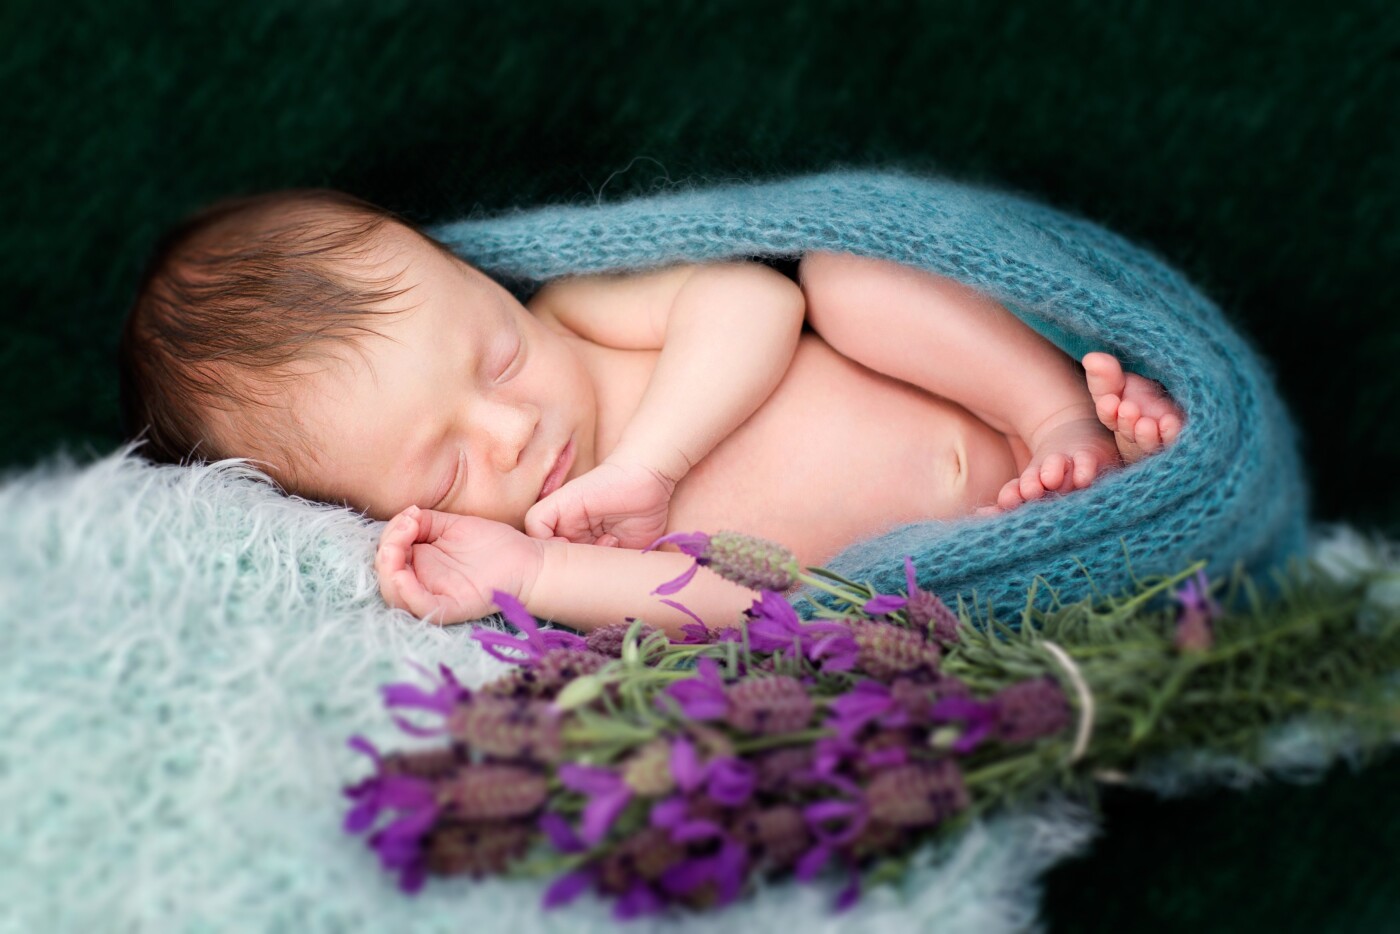 This gorgeous baby is Michael. He is 11 days old in this photograph. <br />
The photo shoot was a gift to my best friend. We were waiting for this moment for such a long time. And the miracle happened, little prince Michael was born. The photograph was taken in my home based studio, using natural light. The idea was to create a unique atmosphere for the baby to make him feel comfy and relaxed. We achieved what we wanted and this photograph is a well proof of it. <br />
 All props were handmade by yours truly. <br />
